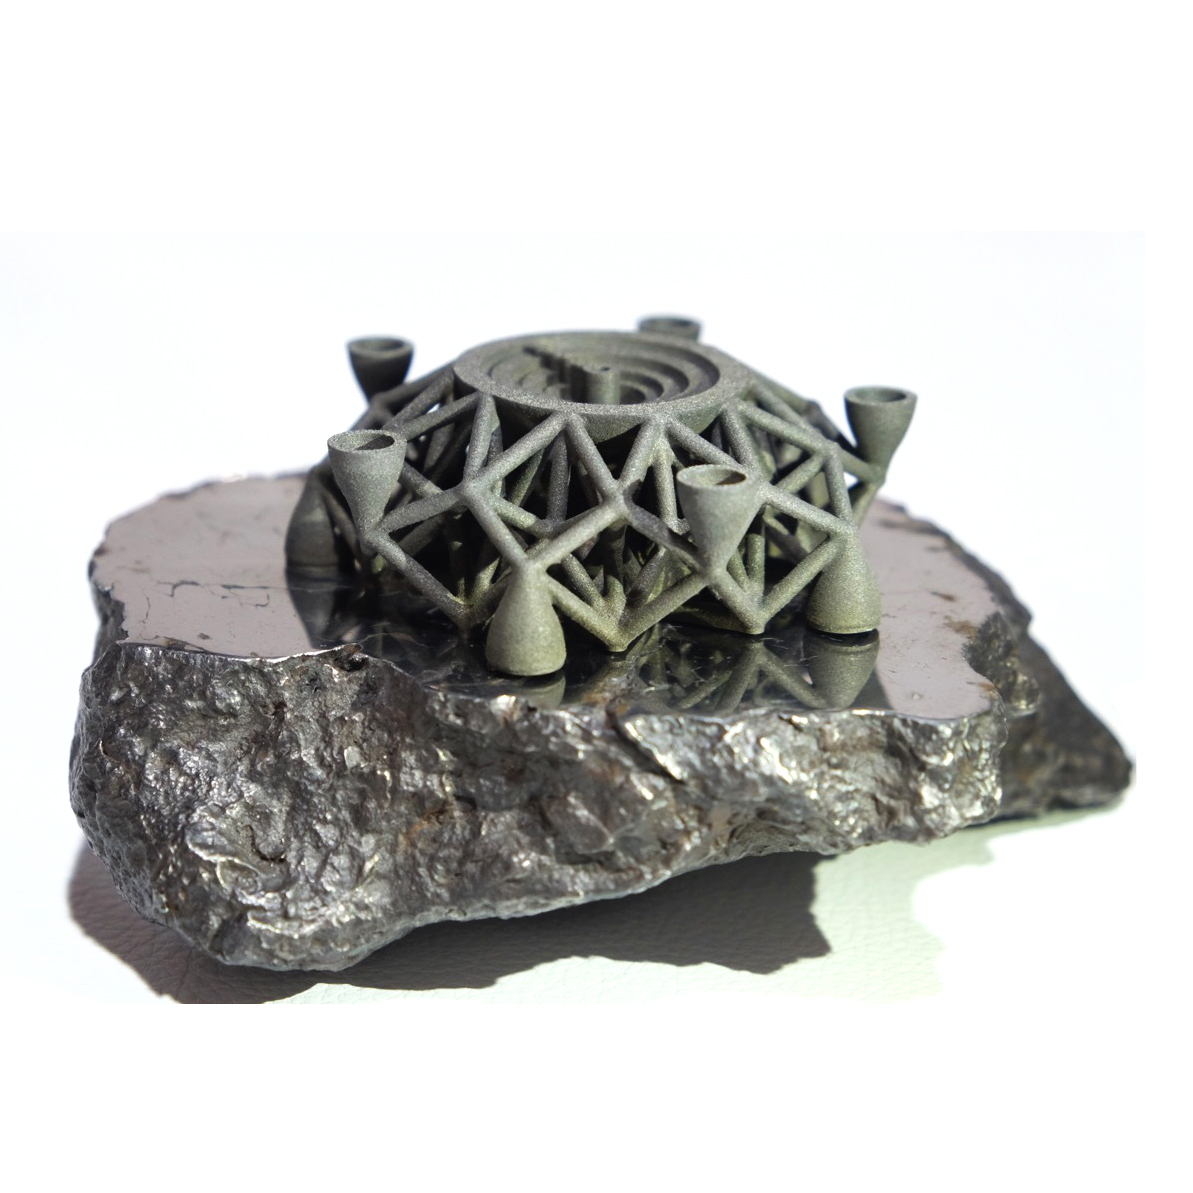 alien metal planetary resources 3D printed object from asteroid material